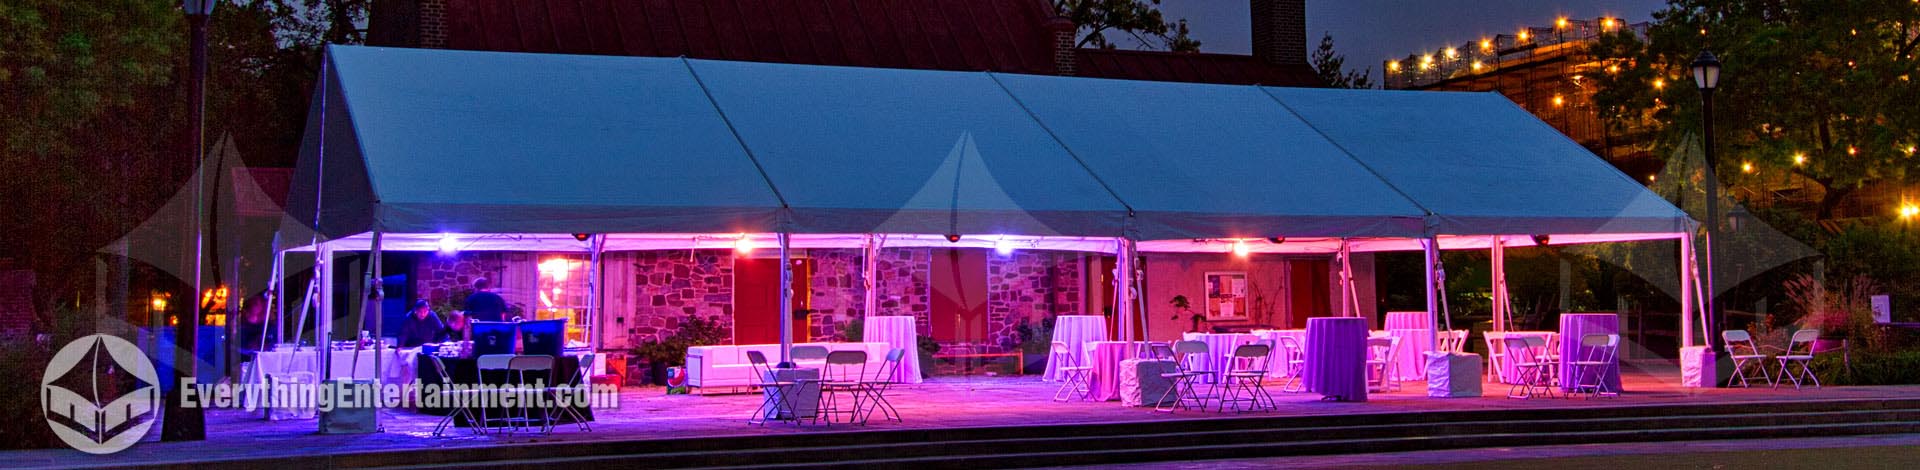 30x60 tent with pink and lavender lighting